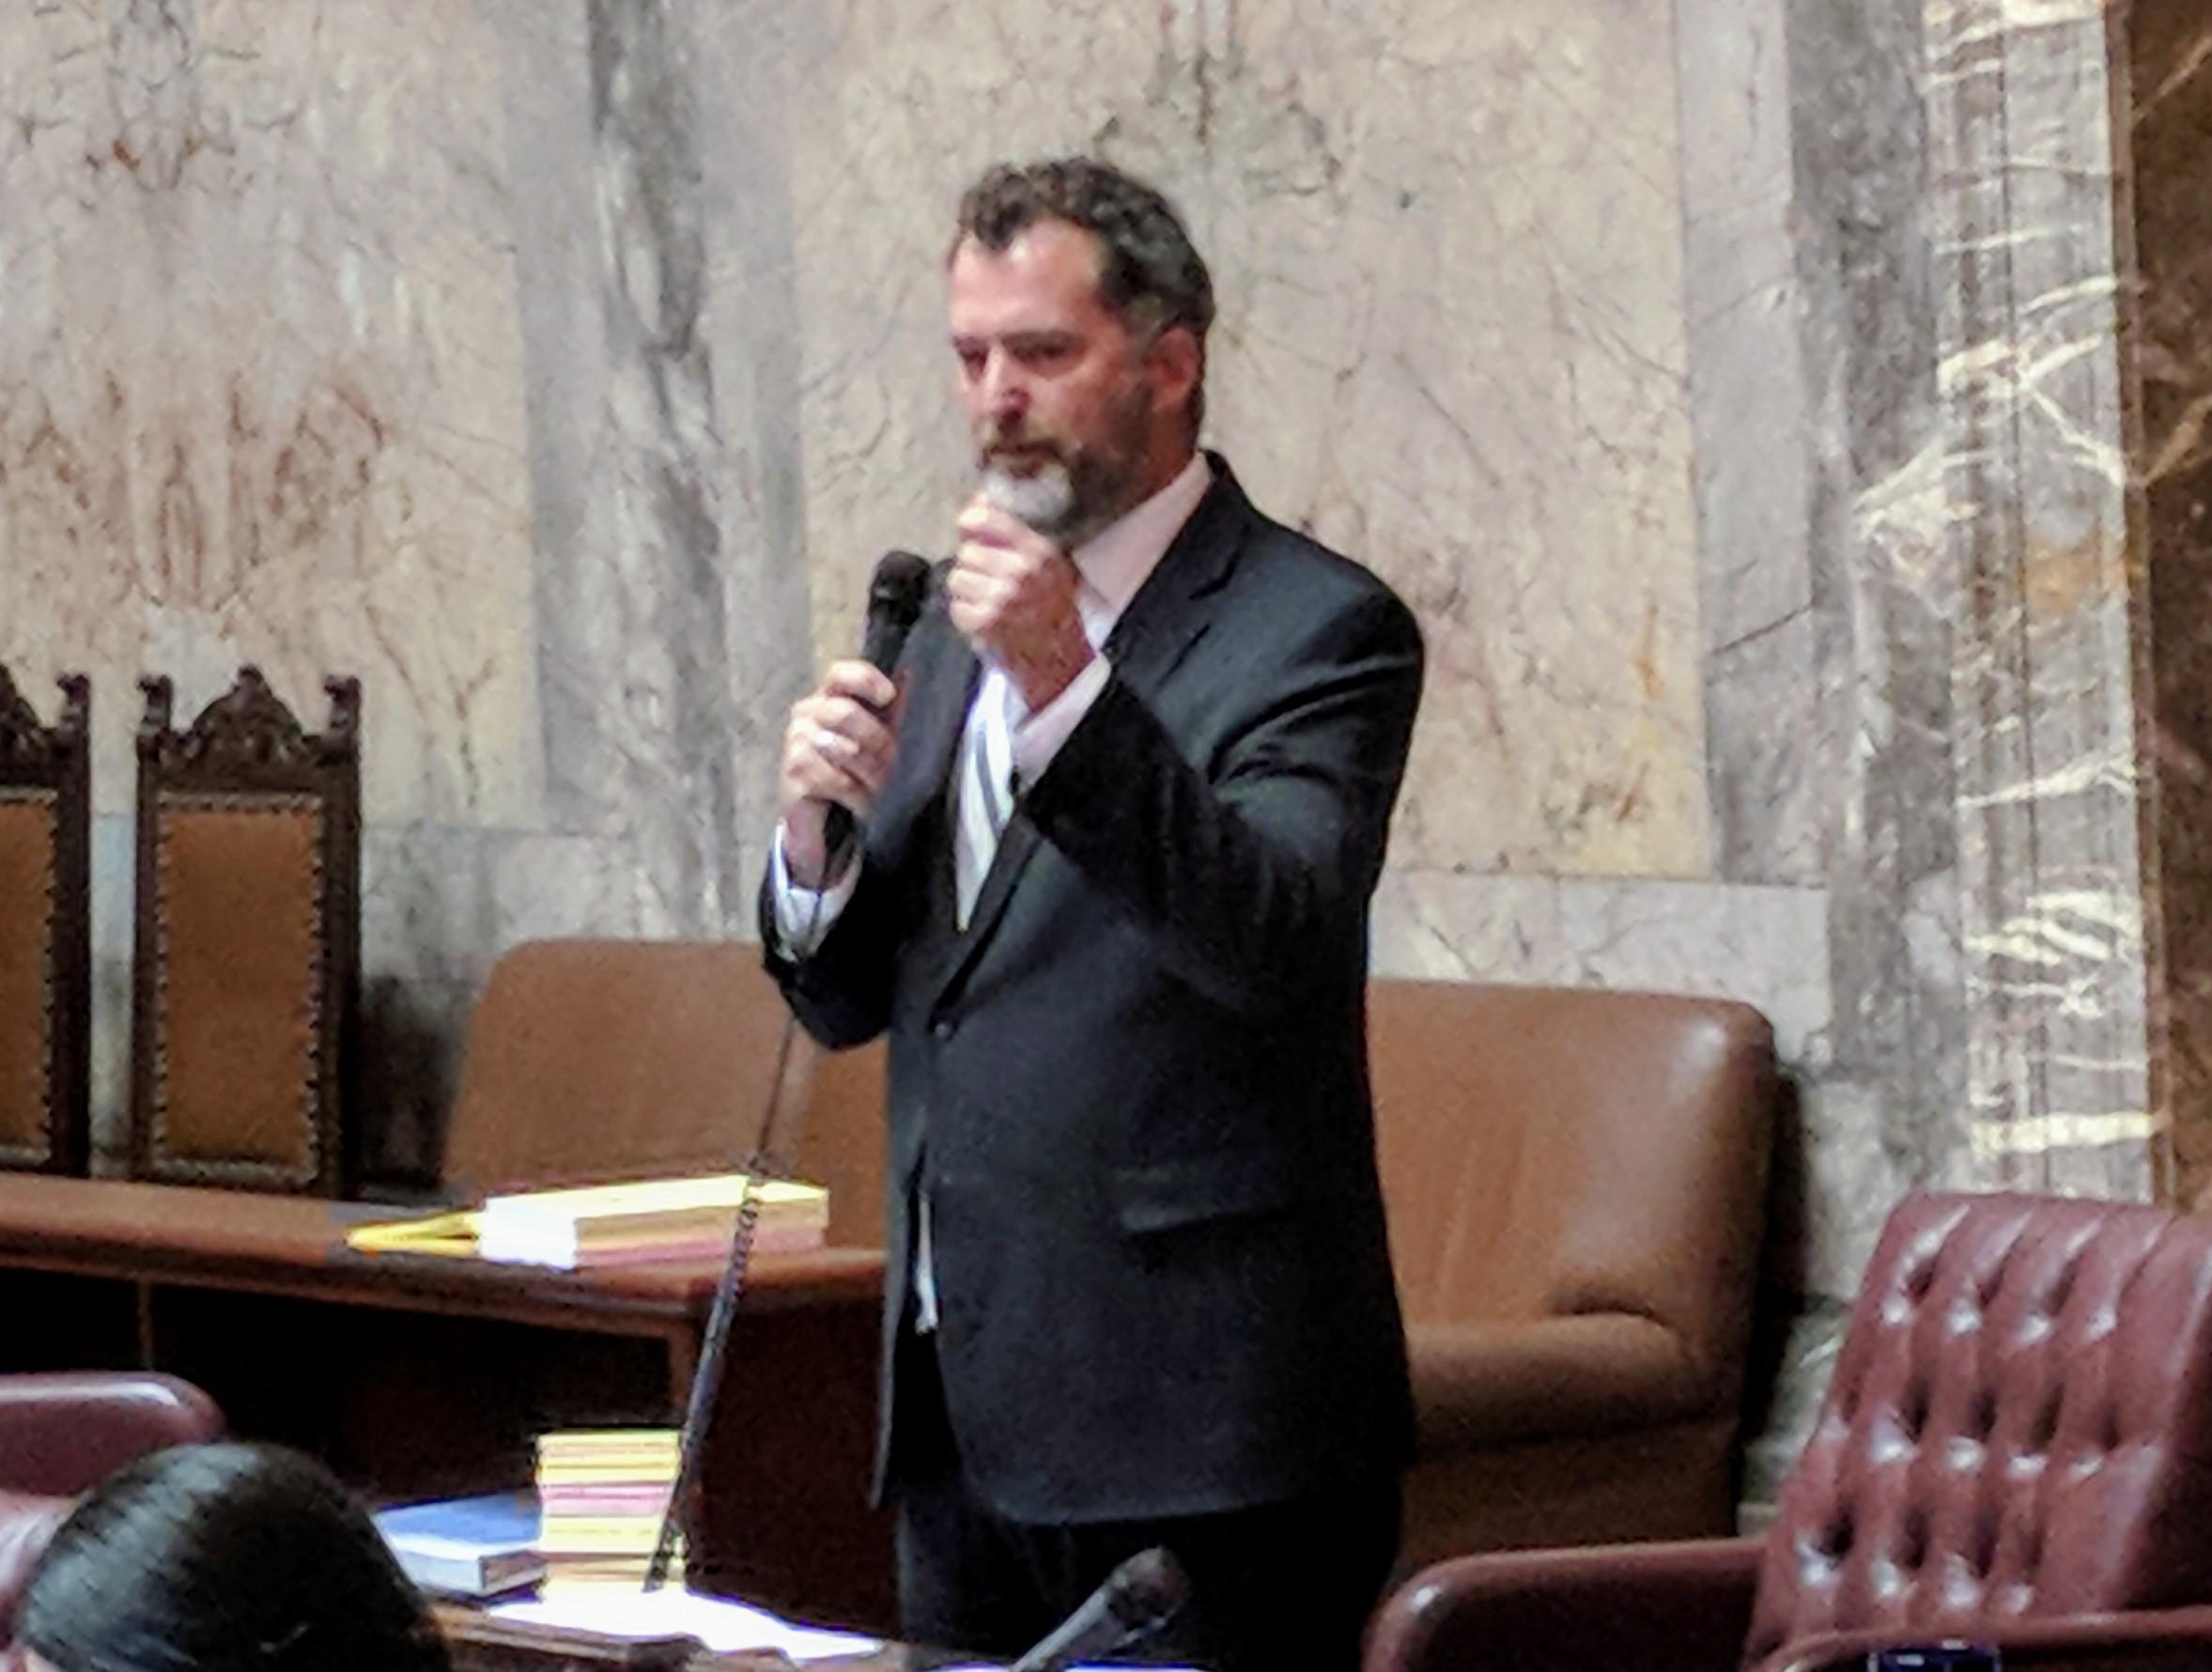 Washington state Sen. Kevin Ranker is the subject of a workplace misconduct investigation. CREDIT: WASHINGTON SENATE